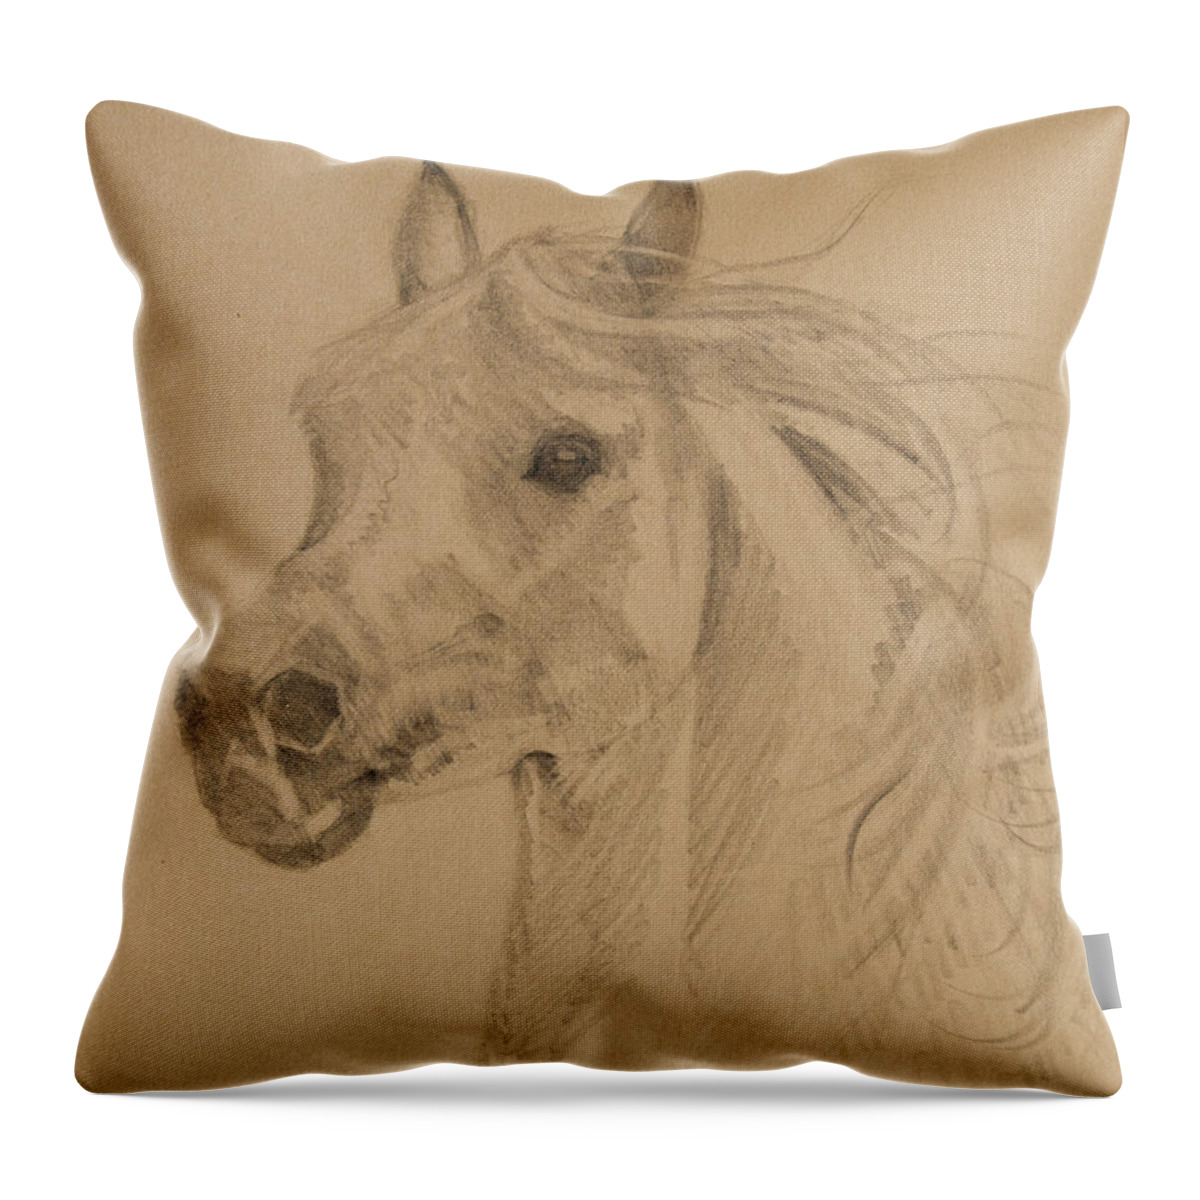 Horse Throw Pillow featuring the drawing Arabian Portrait by Jani Freimann